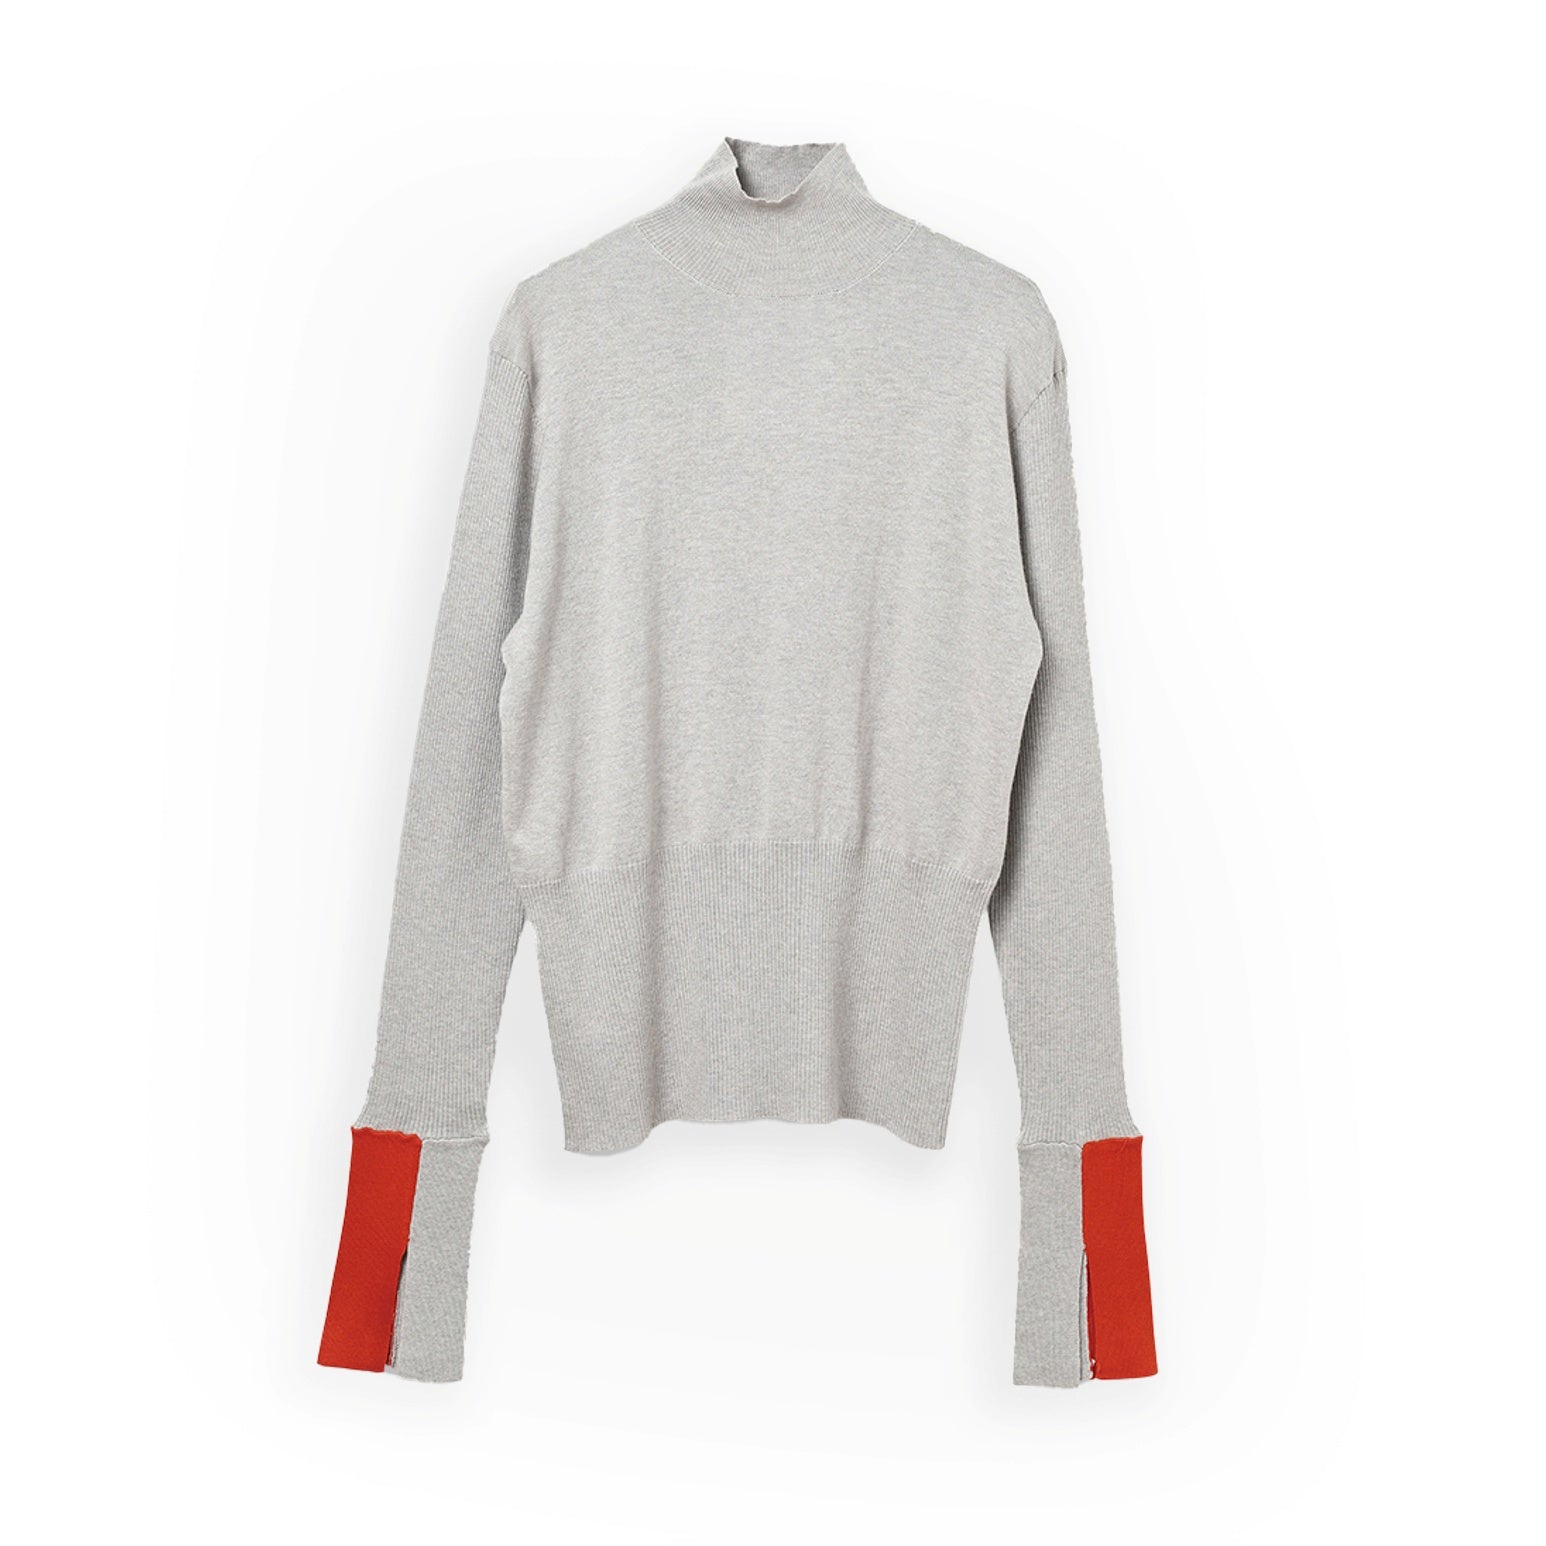 No:WHT24FKN4031_GRAY | Name:color block knit | Color:Gray【WHYTO_ホワイト】【入荷予定アイテム・入荷連絡可能】